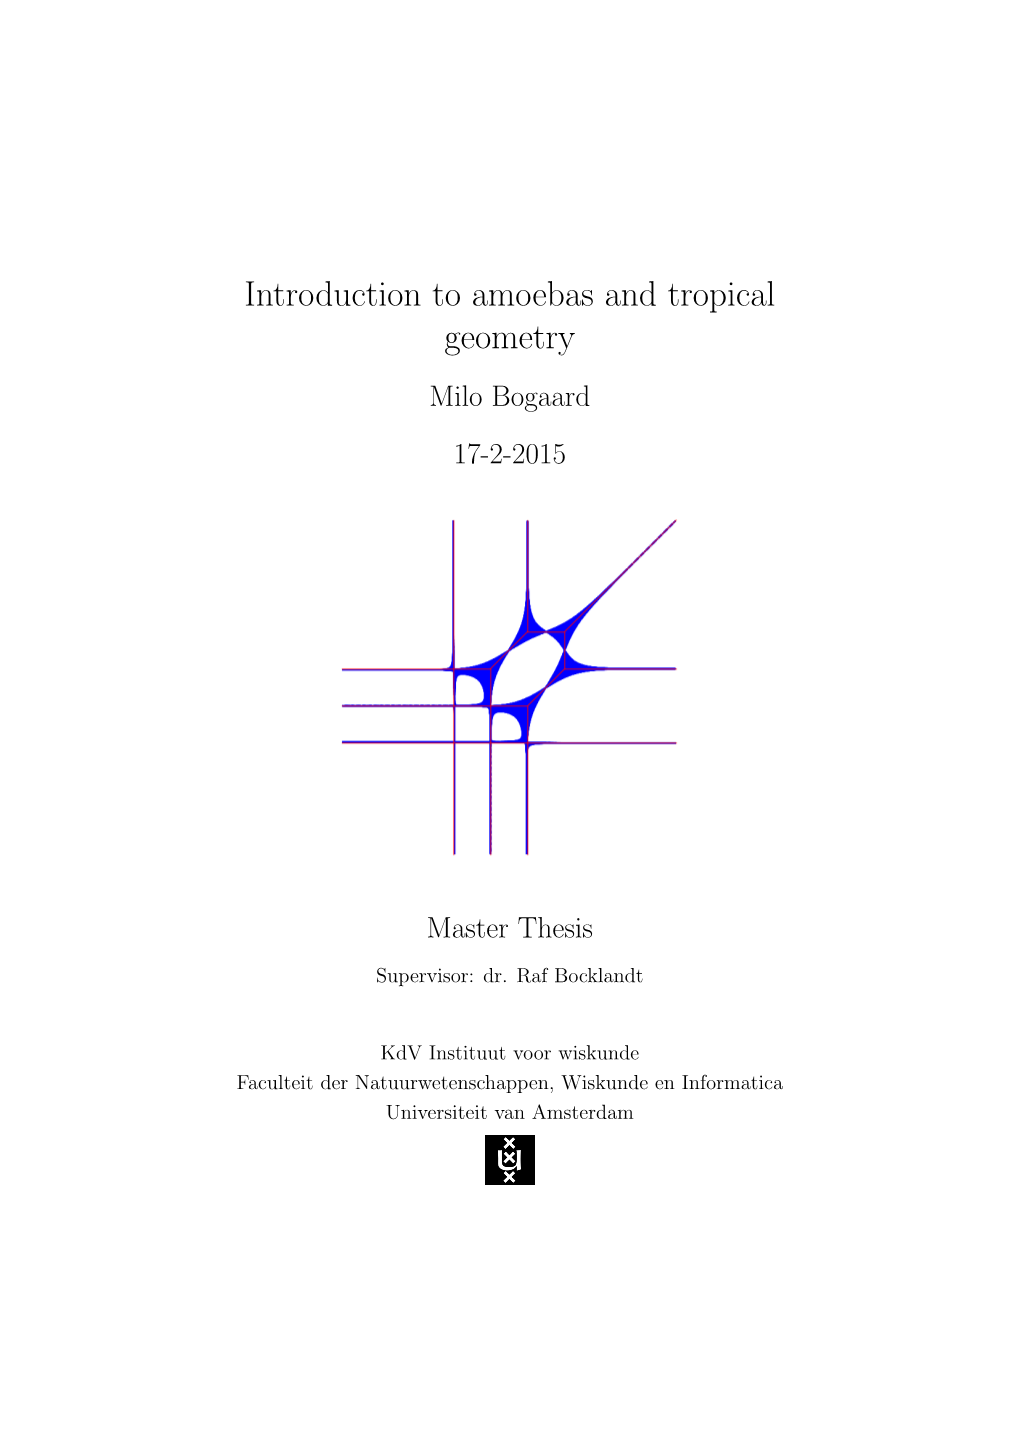 Introduction to Amoebas and Tropical Geometry Milo Bogaard 17-2-2015